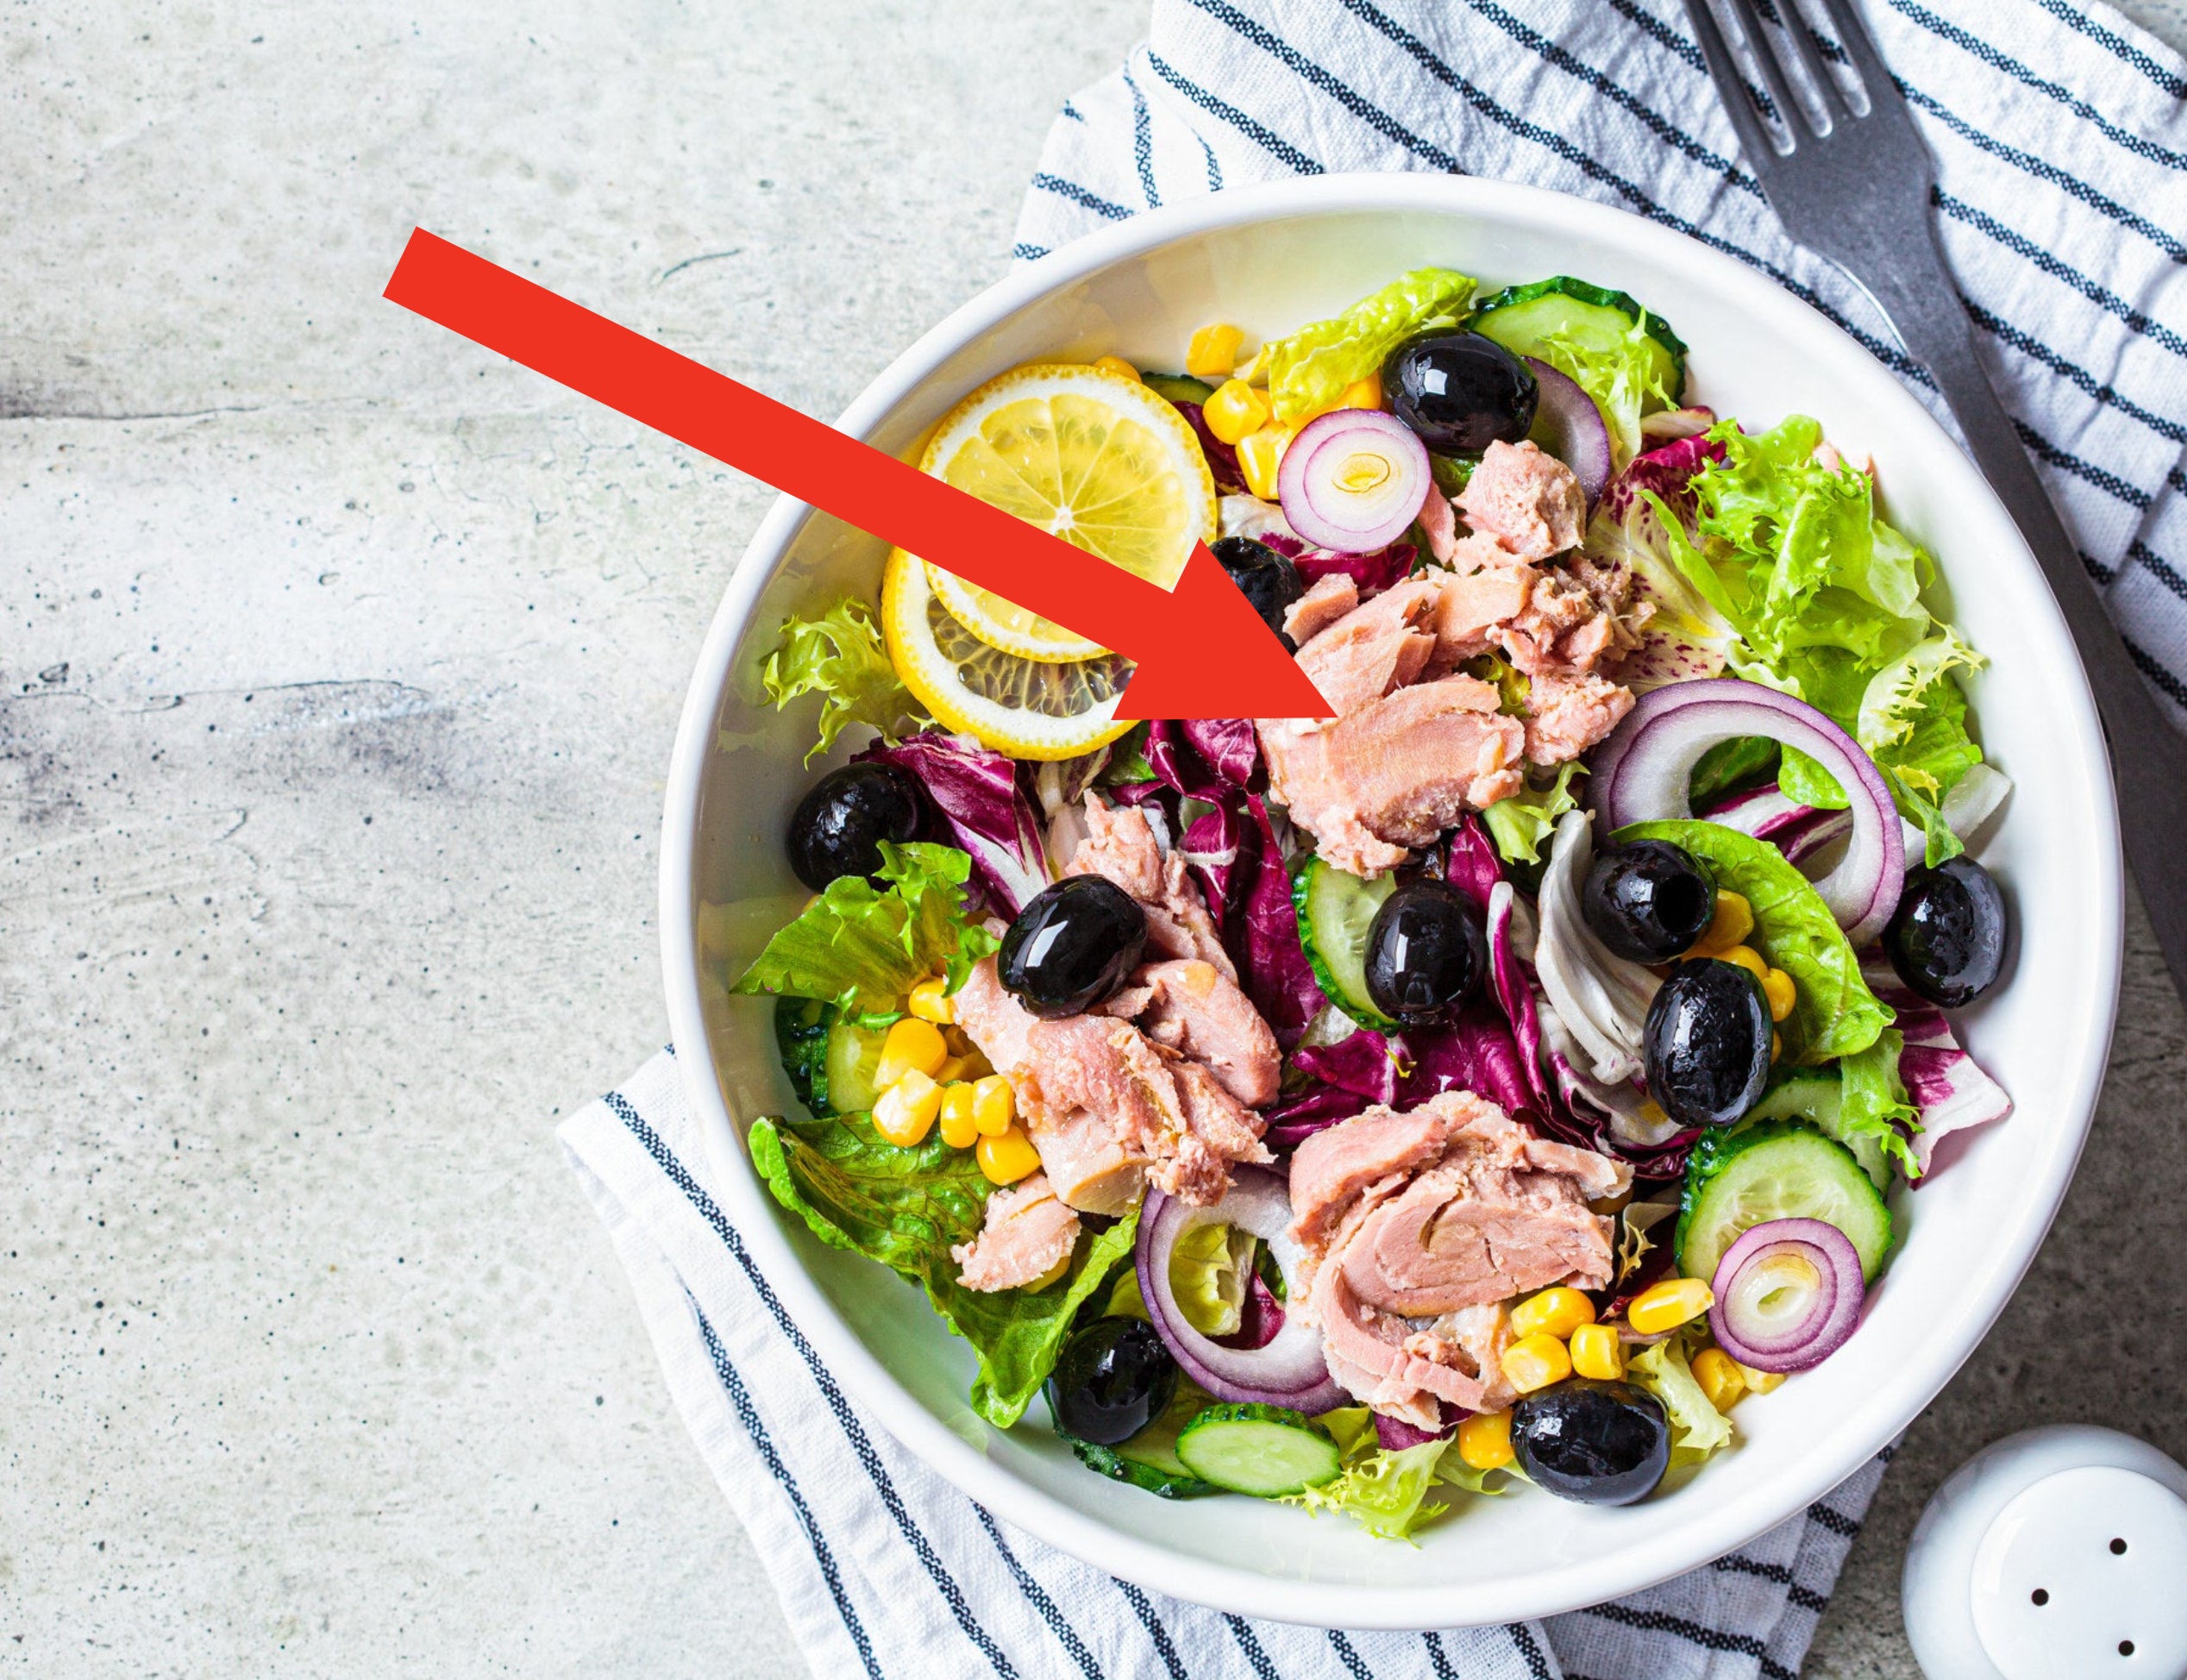 Tuna salad with cucumbers, corn, olives and red onions in a white bowl.